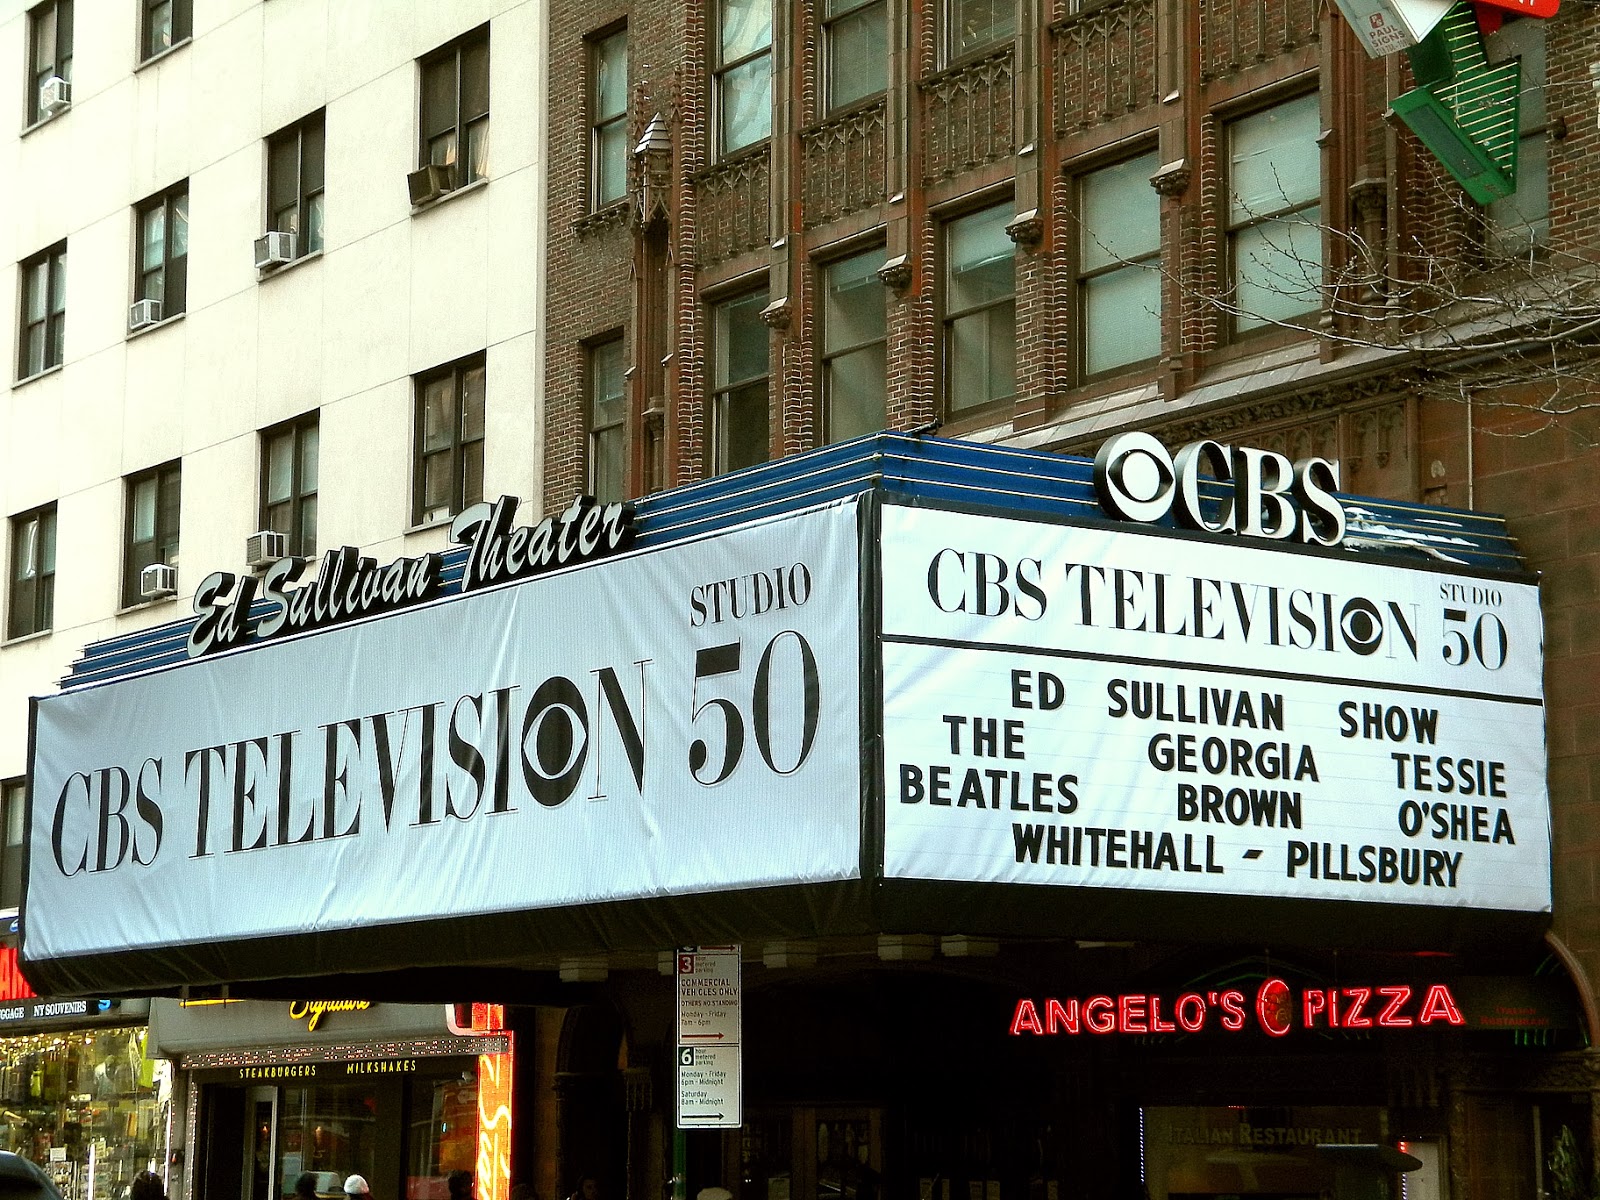 The Beatles The Ed Sullivan Theater Marquee Public Domain Clip Art Photos and Images1600 x 1200